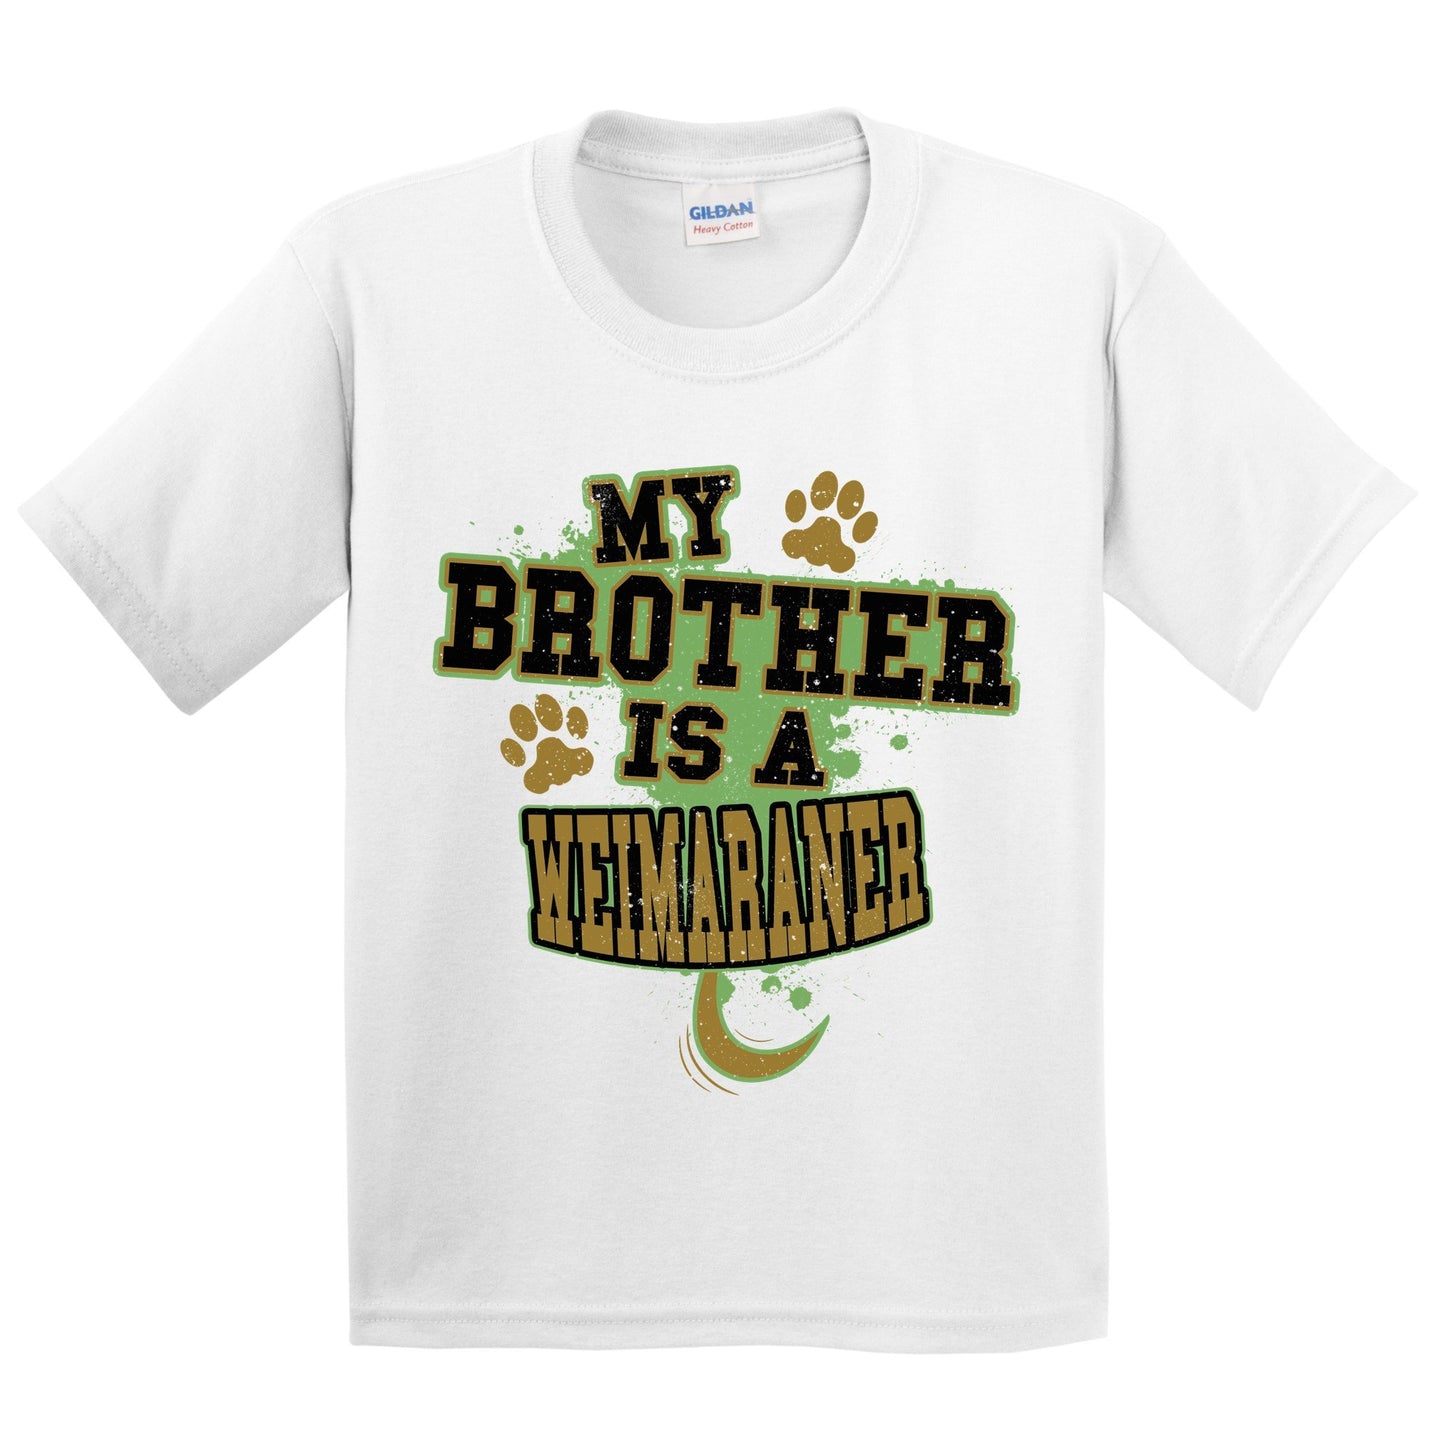 My Brother Is A Weimaraner Funny Dog Kids Youth T-Shirt